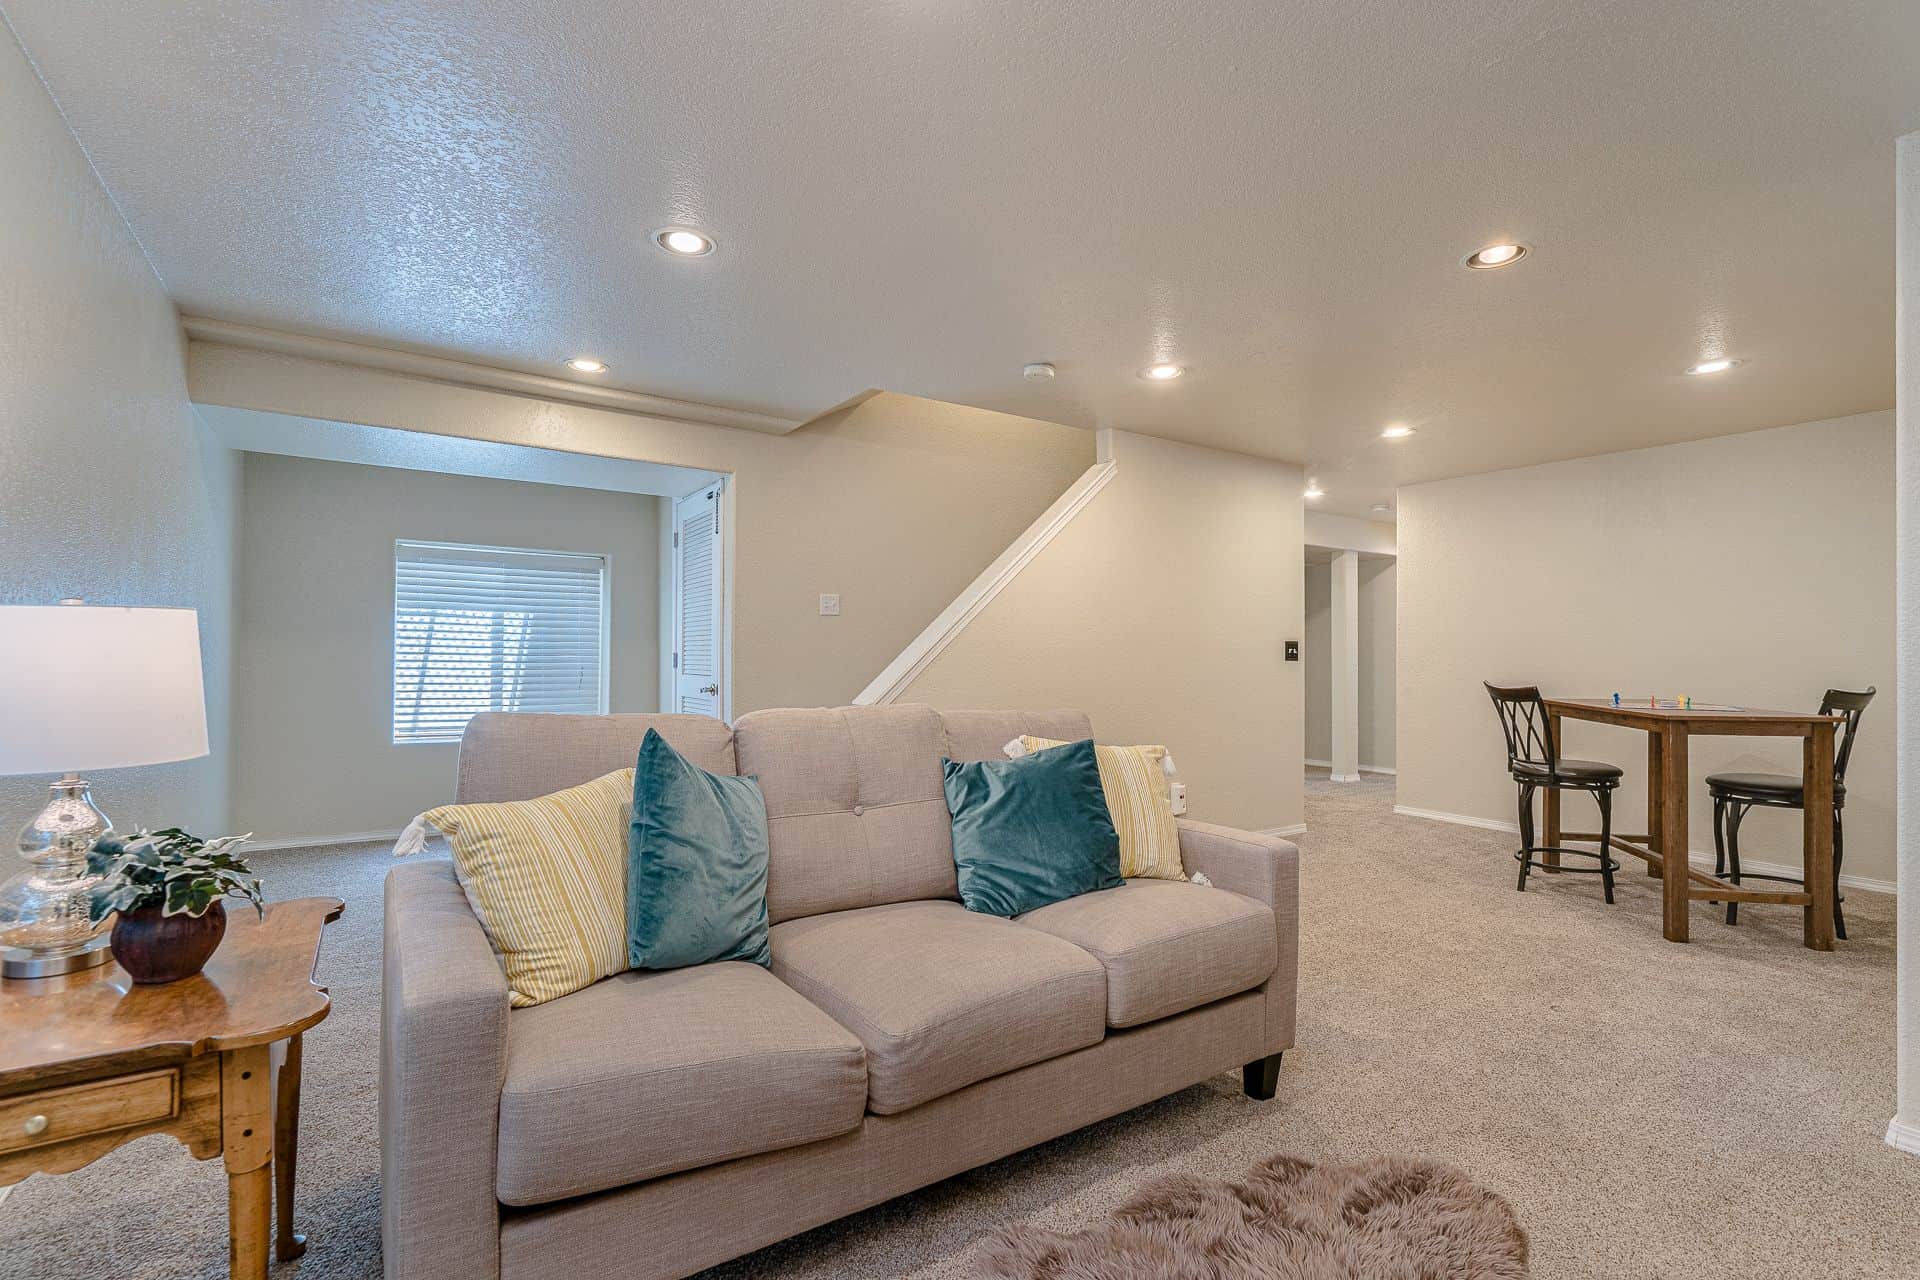 27 – Finished Basement with under stair storage and Rec Room